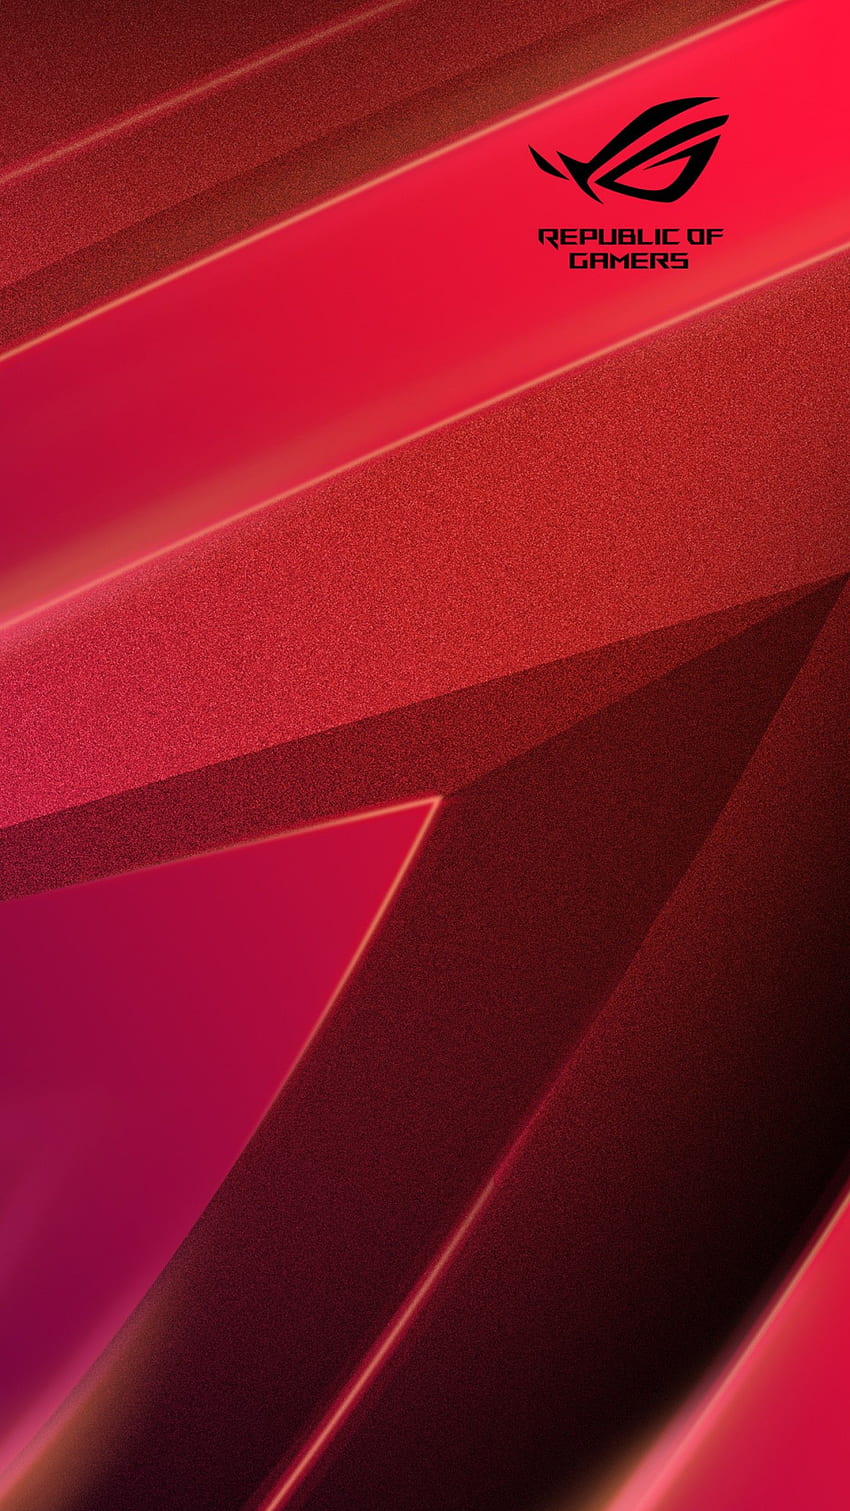 ASUS ROG, Republic of Gamers, Pink, , Abstract,. for iPhone, Android, Mobile and, Neon Asus ROG HD phone wallpaper